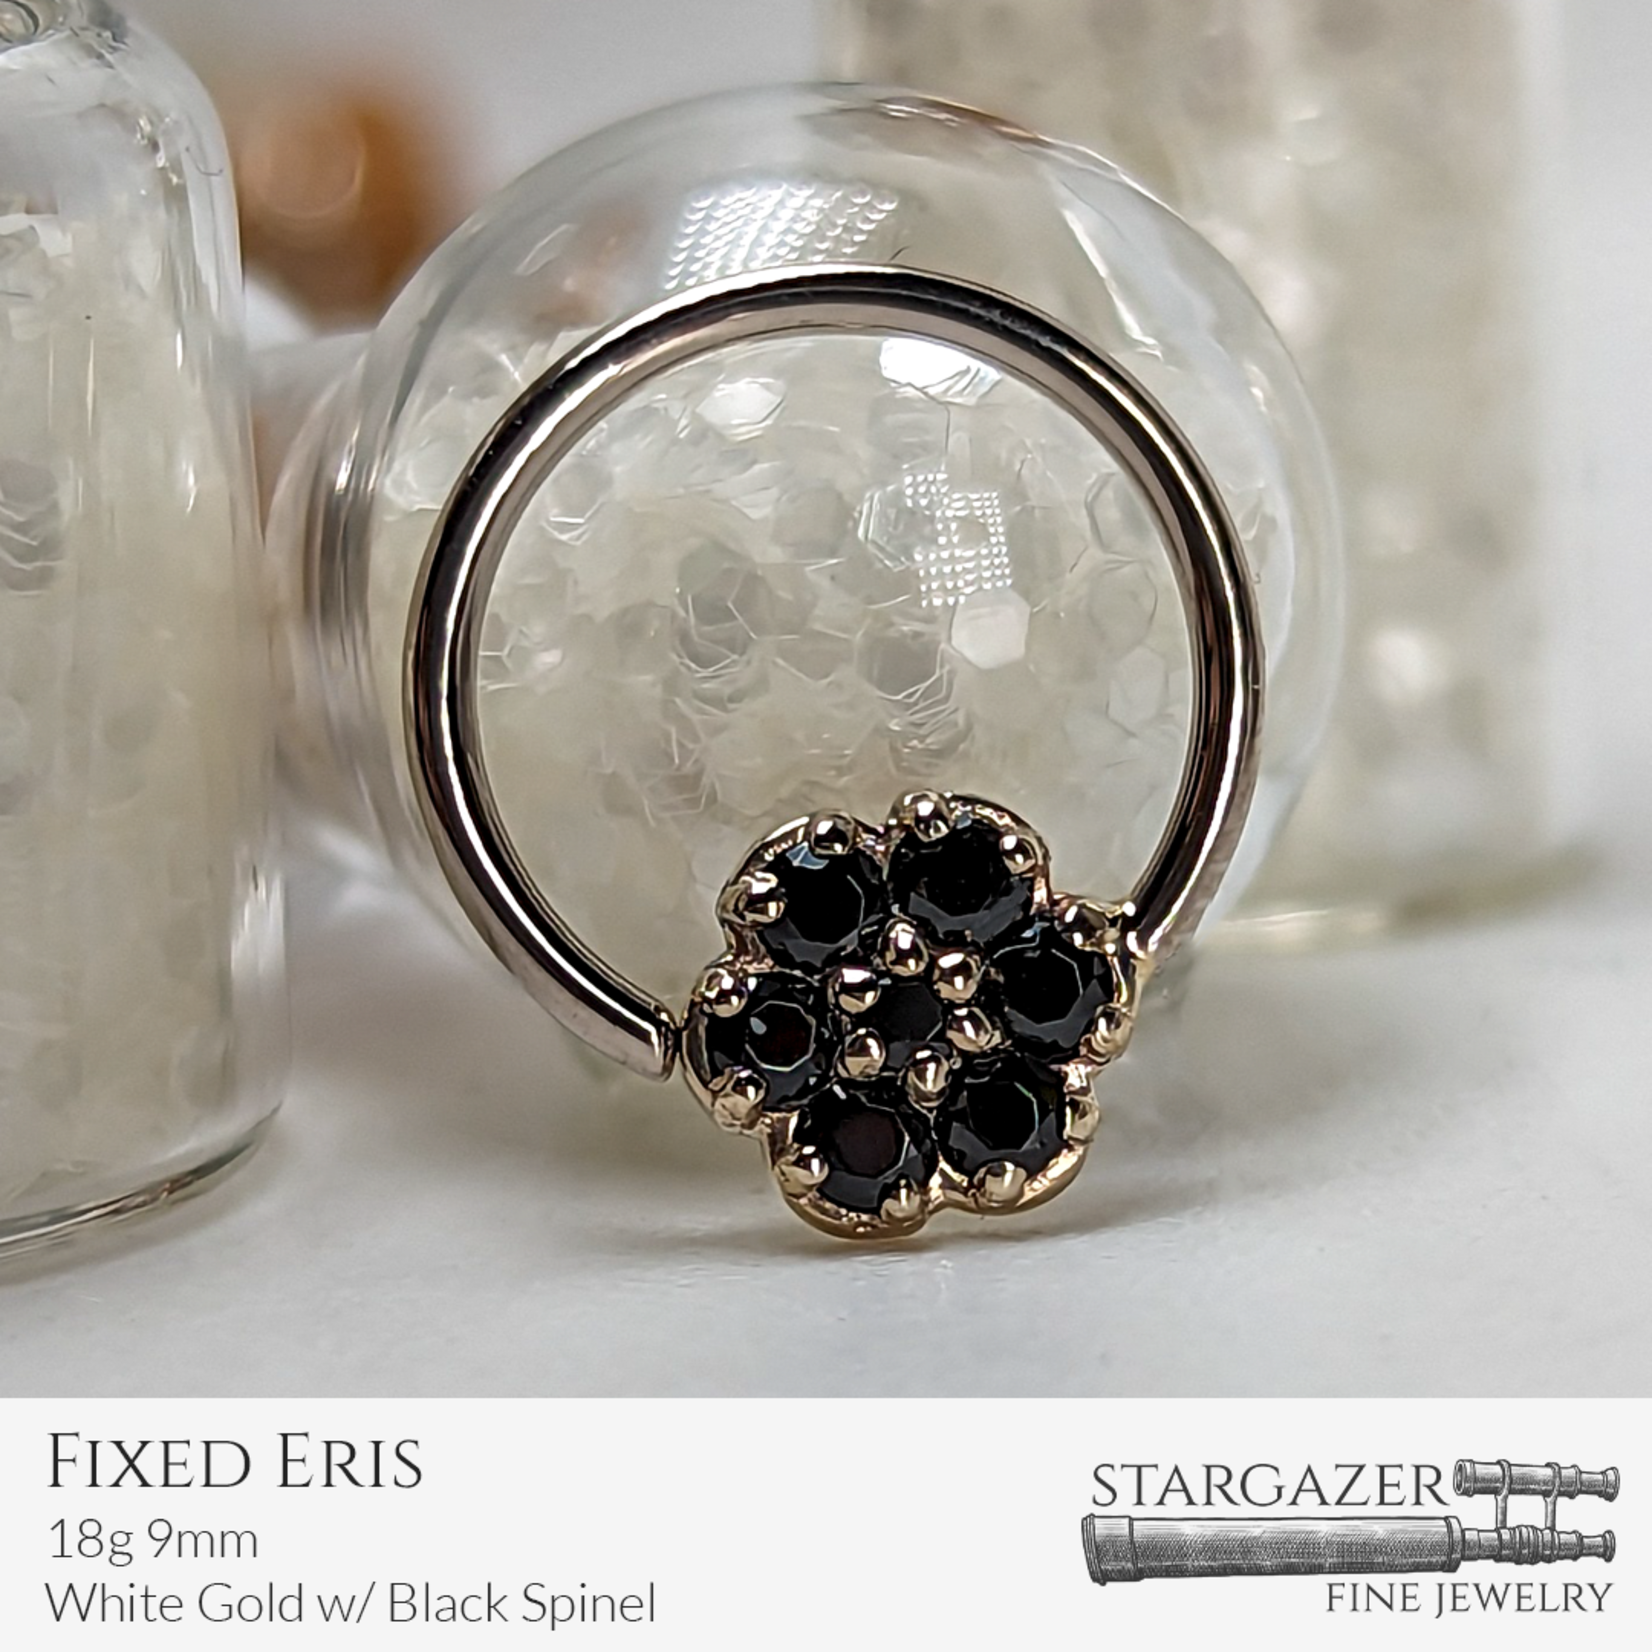 Fixed Eris 18g 9mm; White Gold with Black Spinel